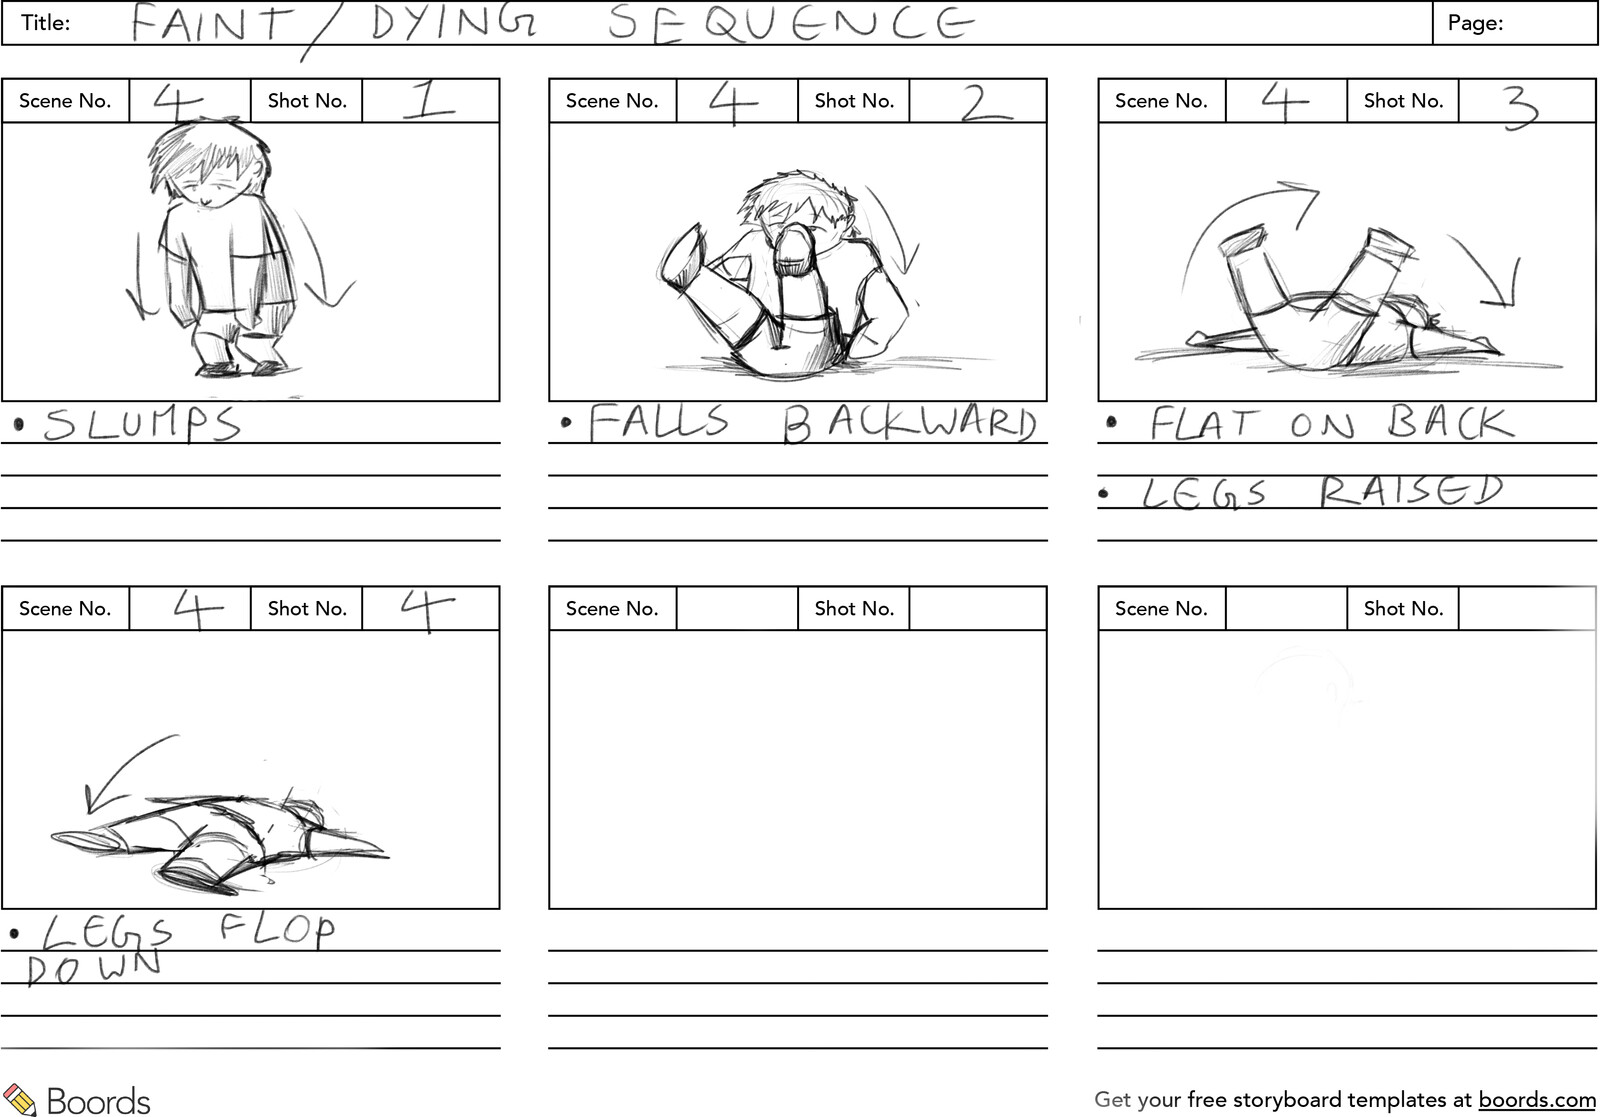 Fainting/dying sequence storyboard